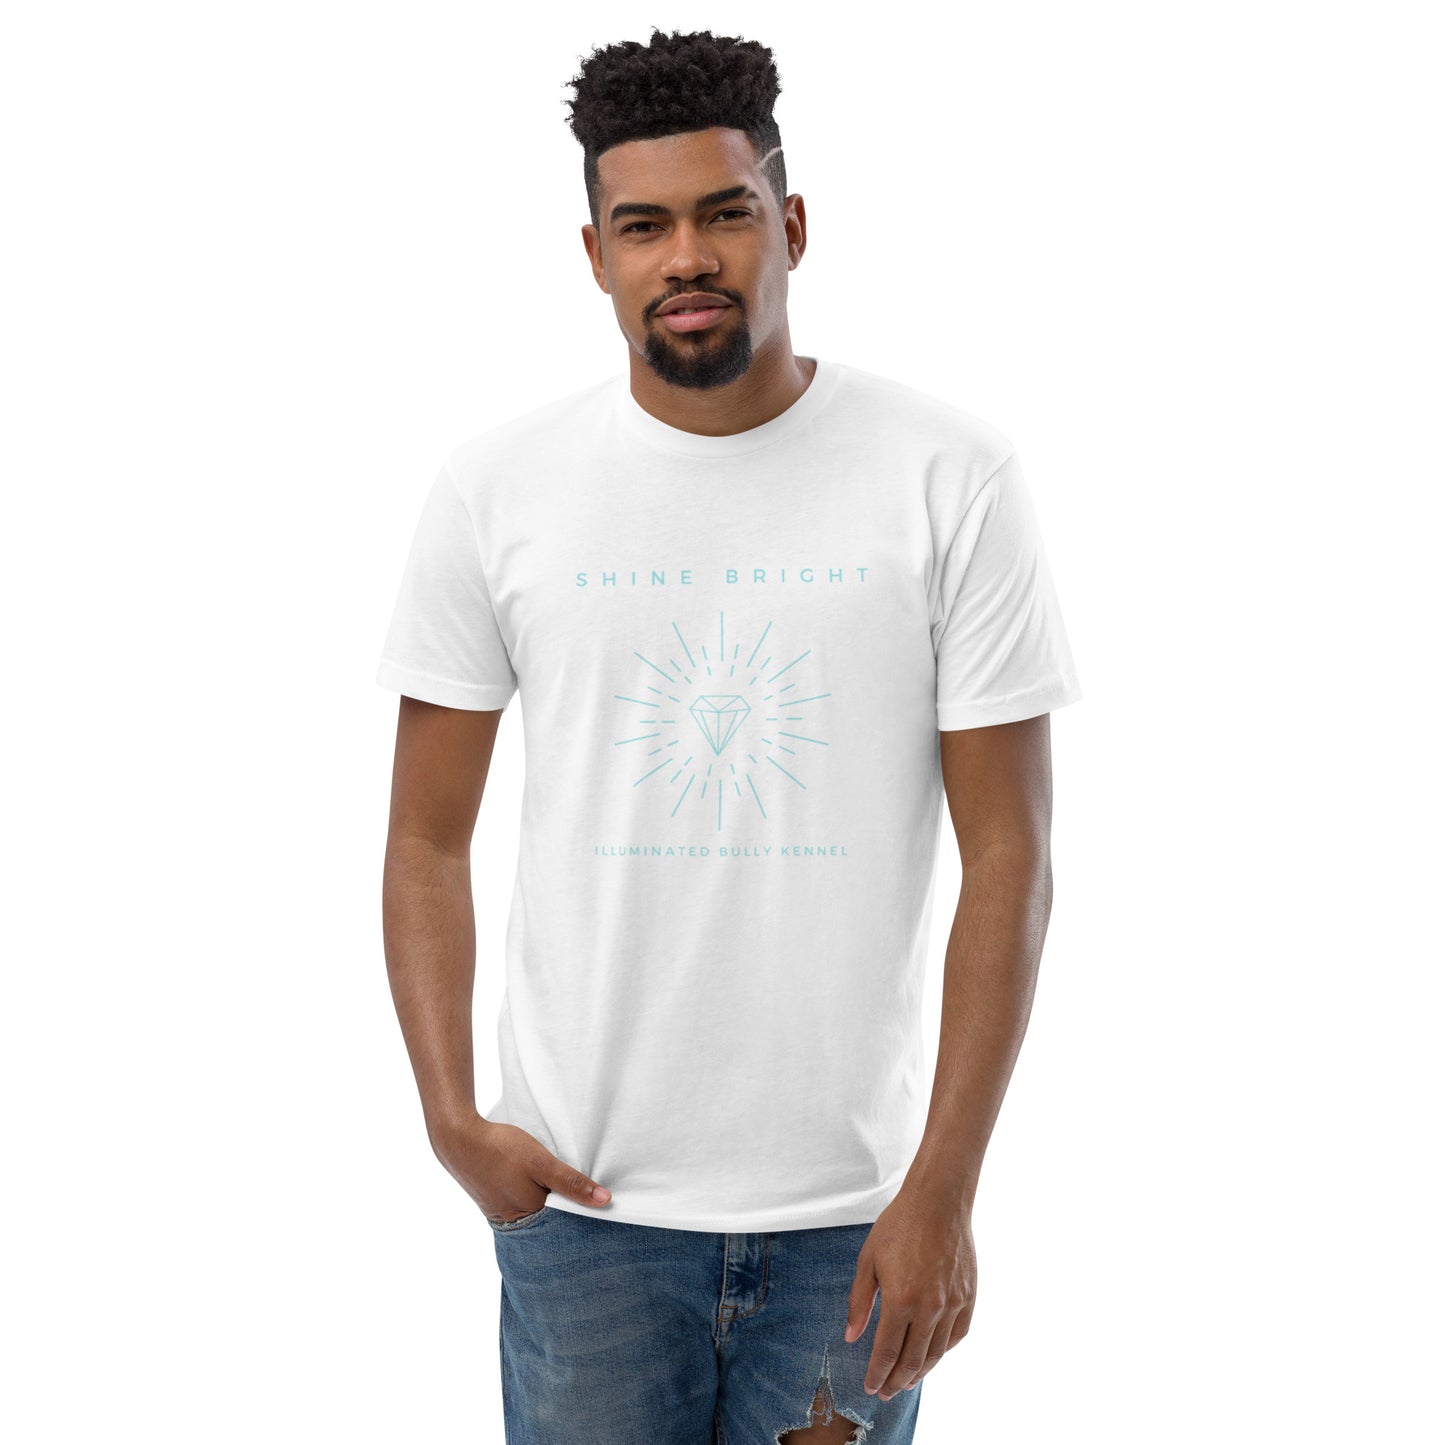 Shine Bright - Men's fitted tee